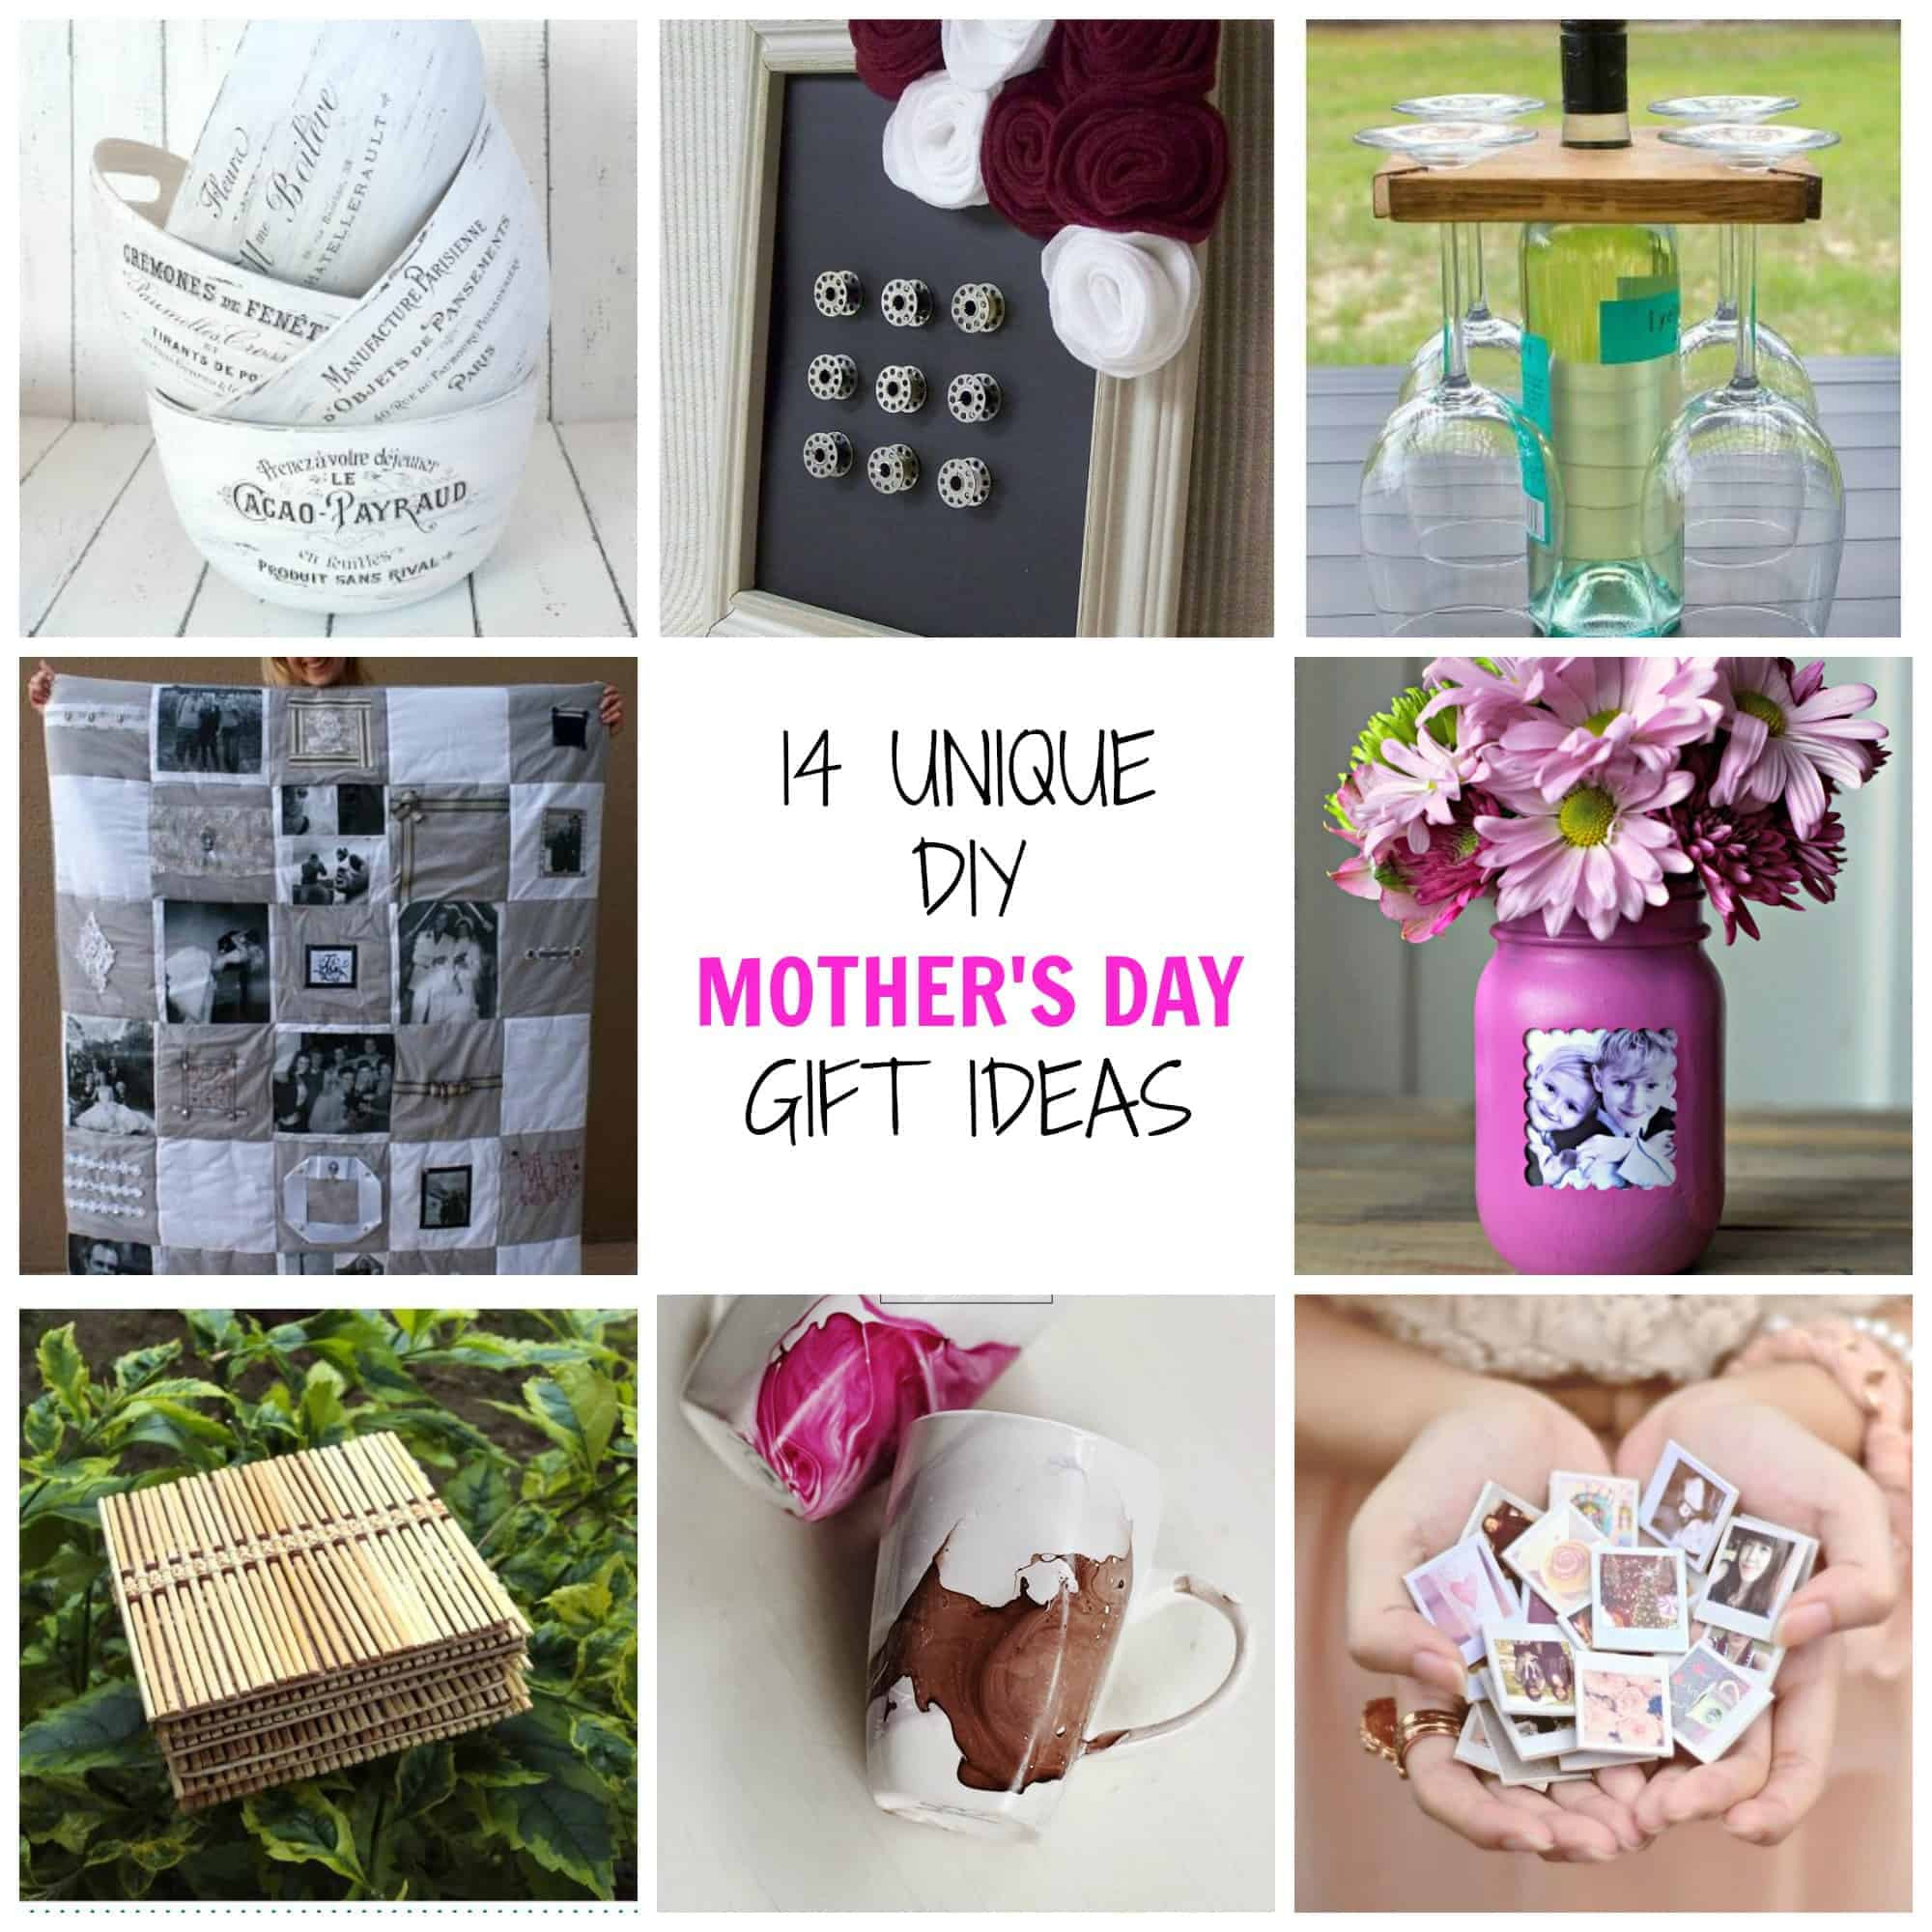 DIY Mothers Day Gifts From Kids
 14 Unique DIY Mother s Day Gifts Simplify Create Inspire